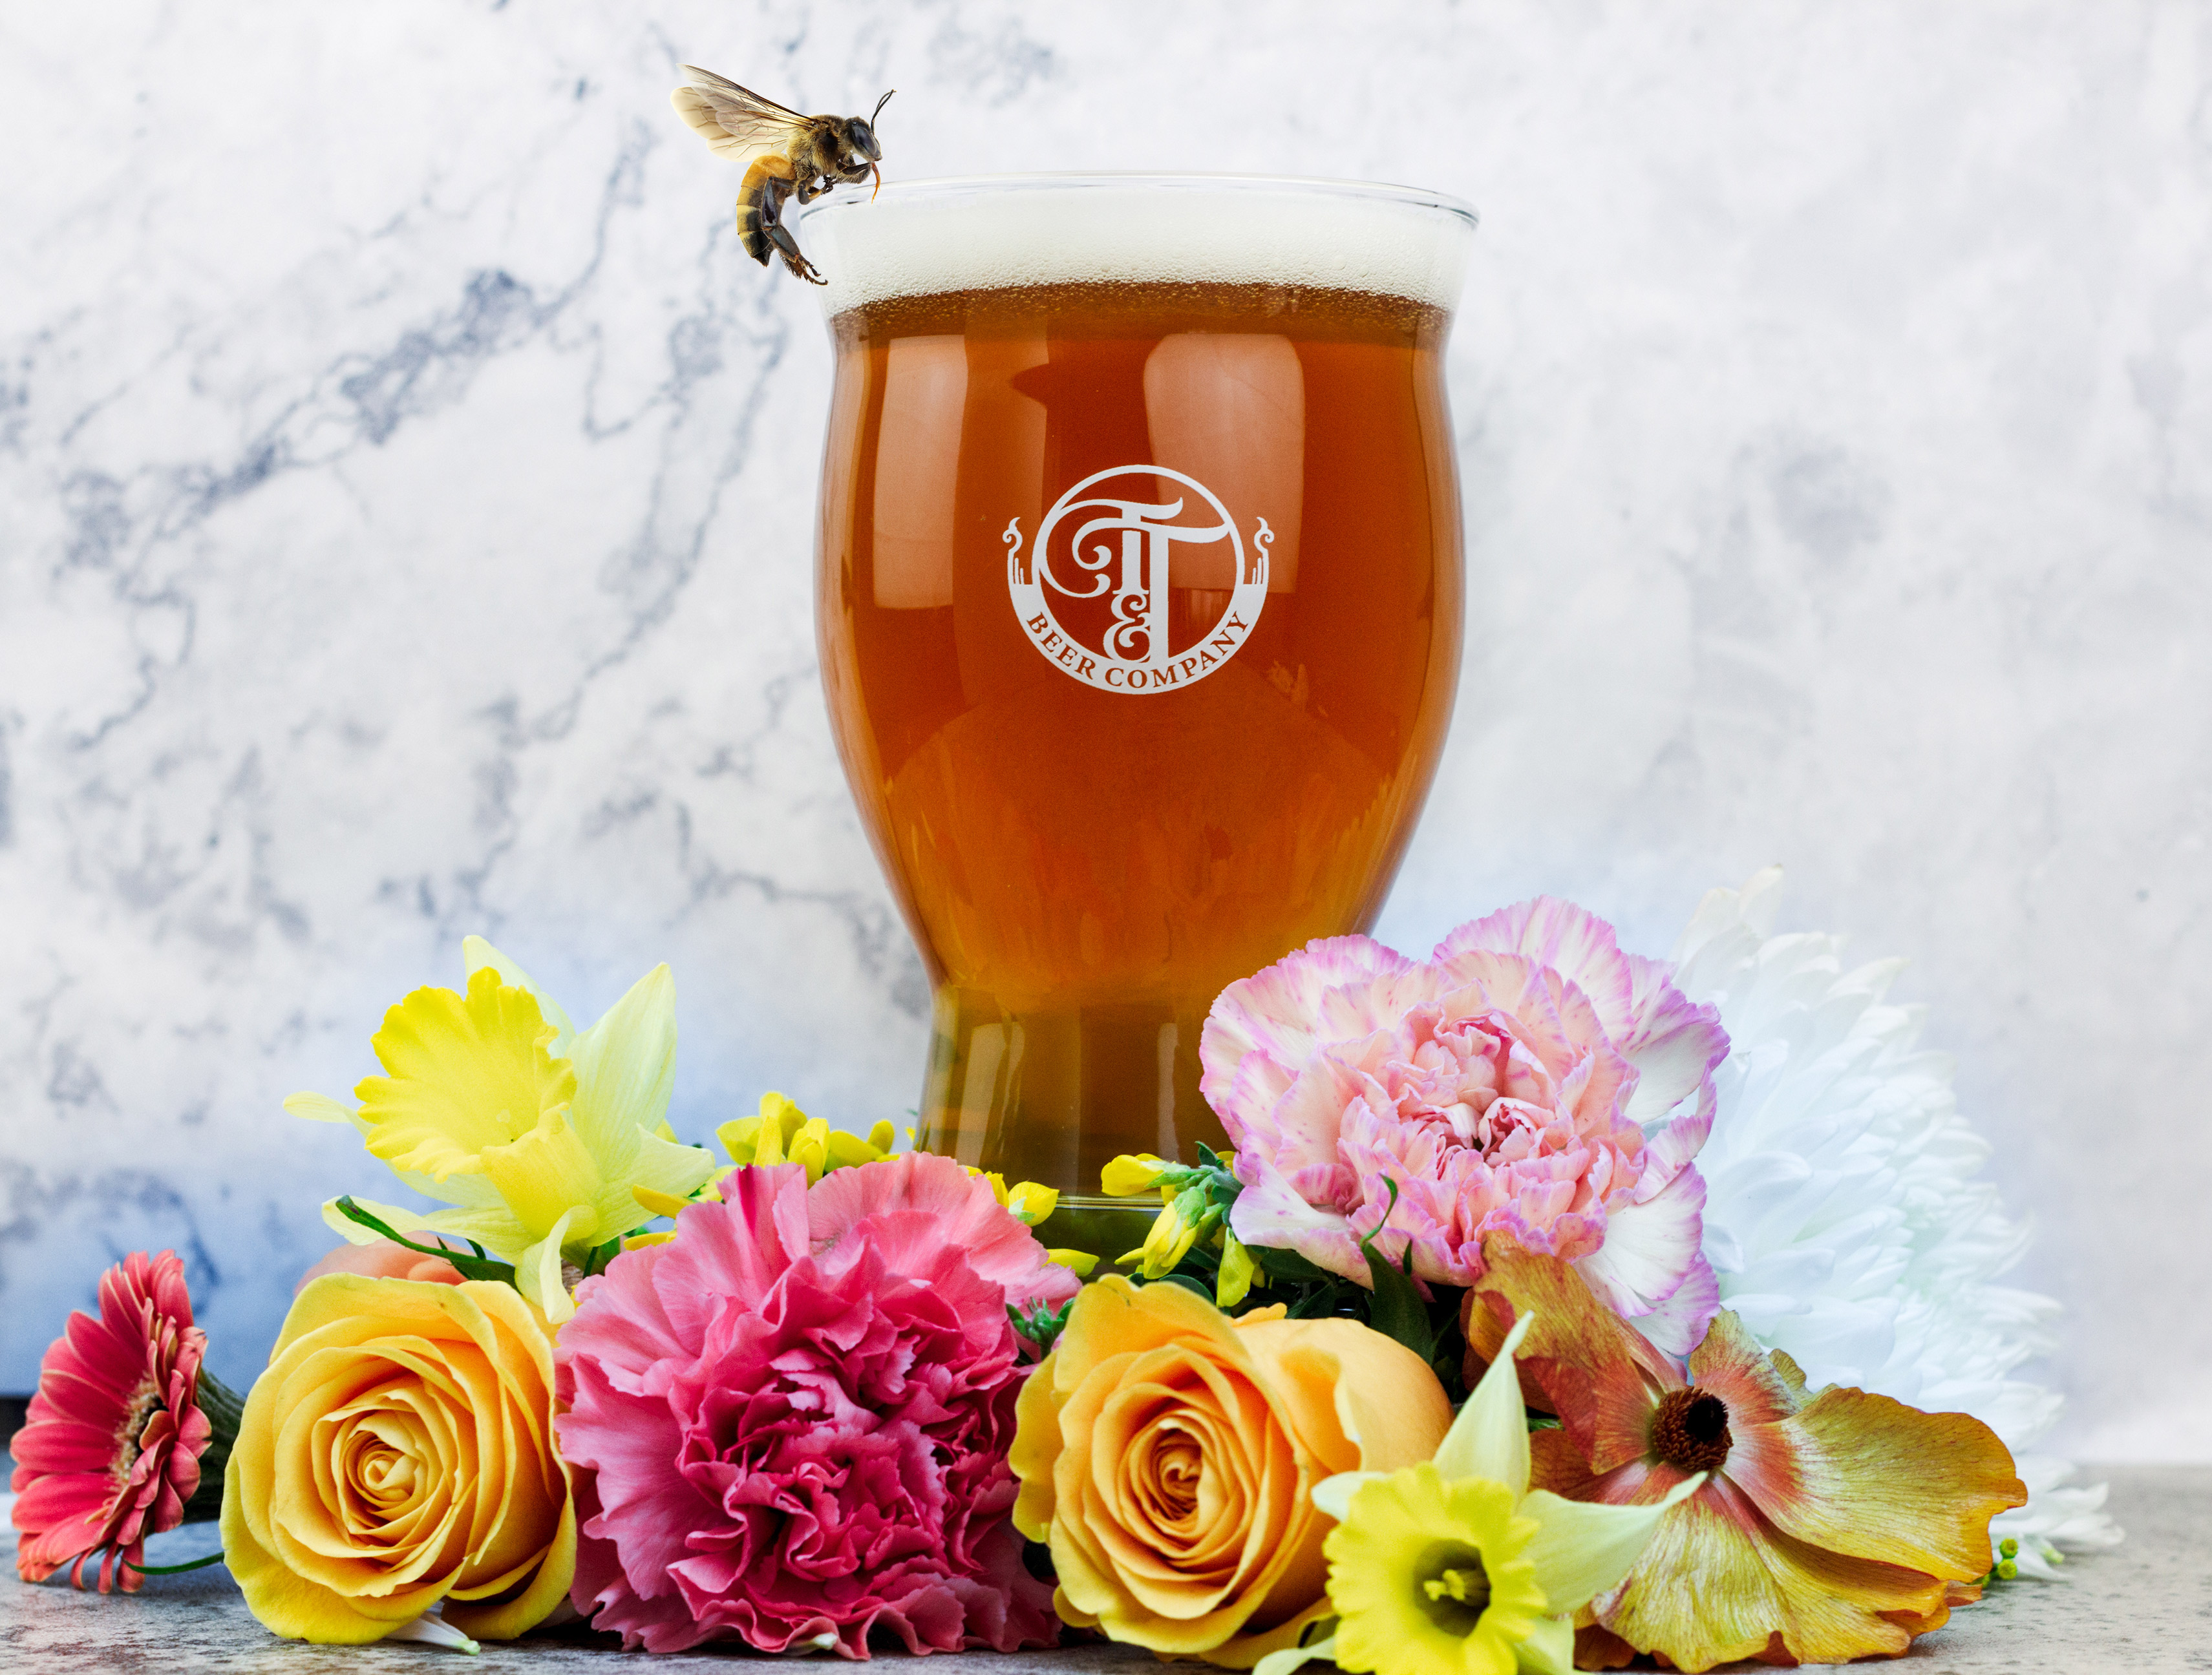 A bee hovers near a glass of beer, with flowers strewn around it